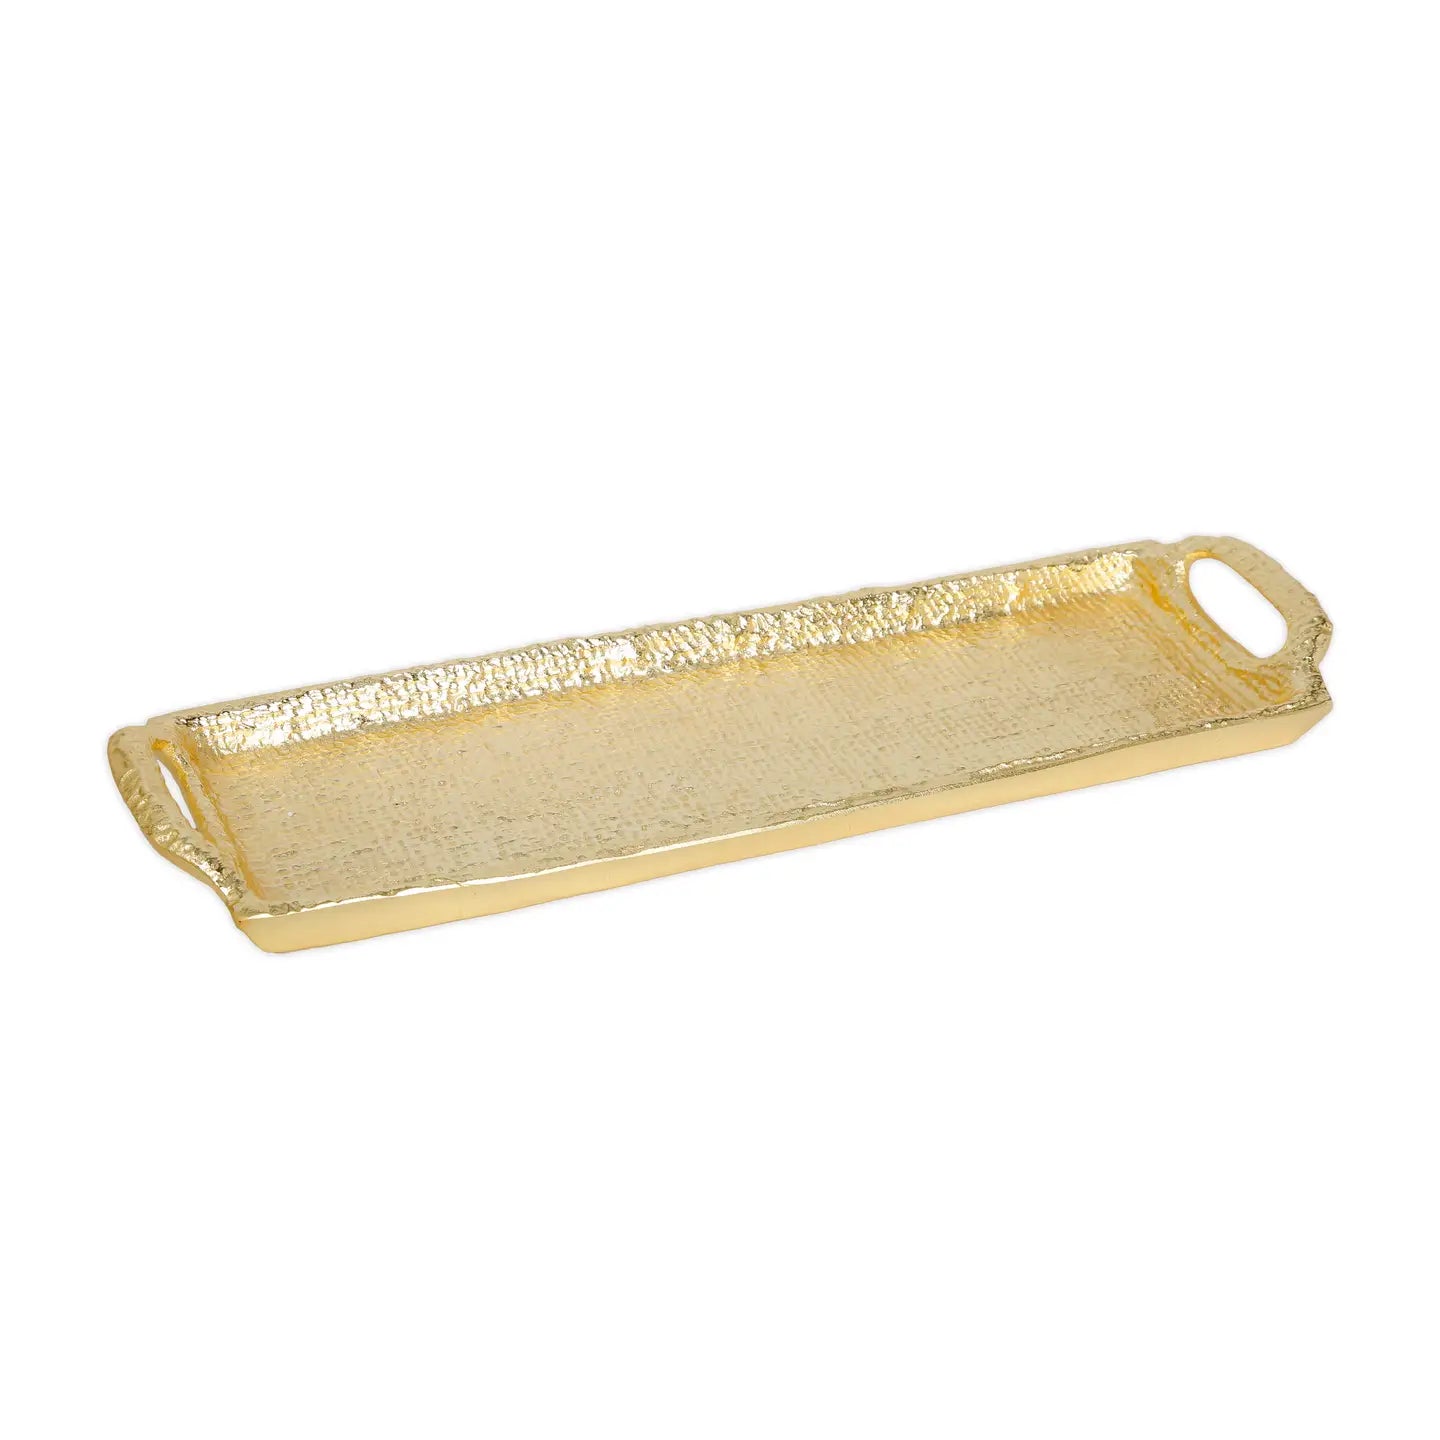 Textured Gold Oblong Tray with Handles - 17.25"L x 5"W